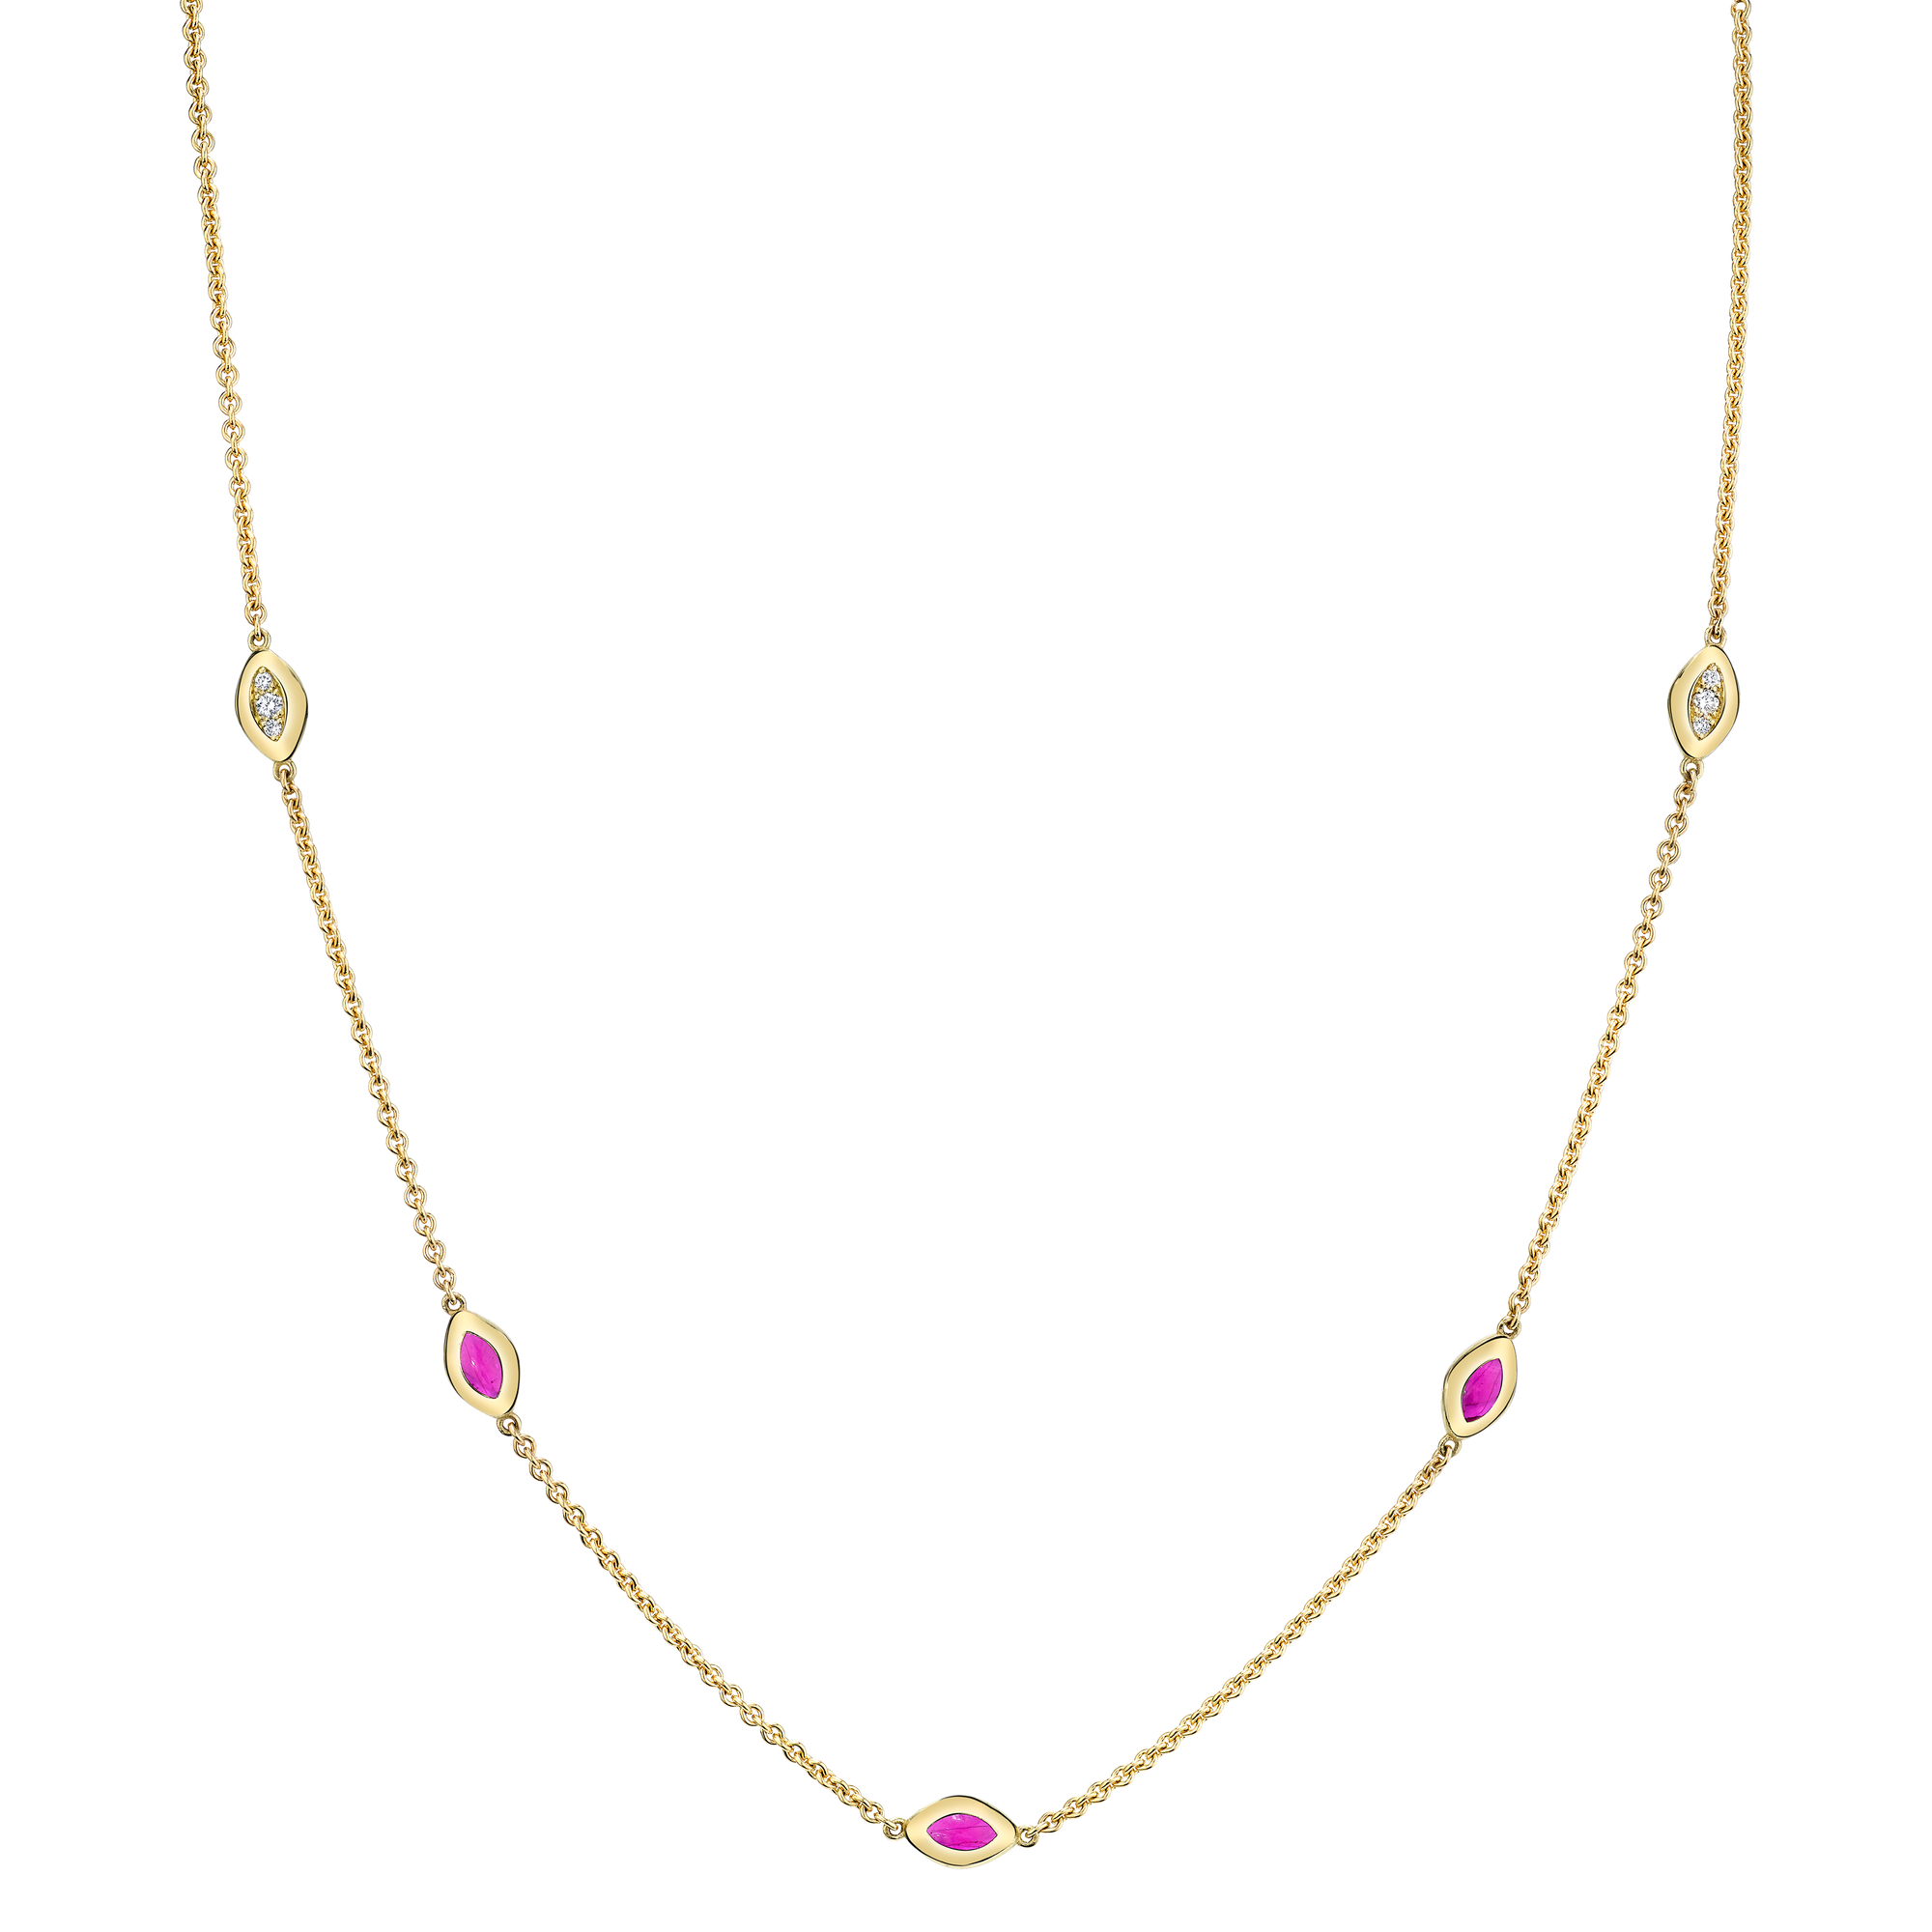 Five Link Italian Gold Necklace with Purple Enamel and Diamond Pave